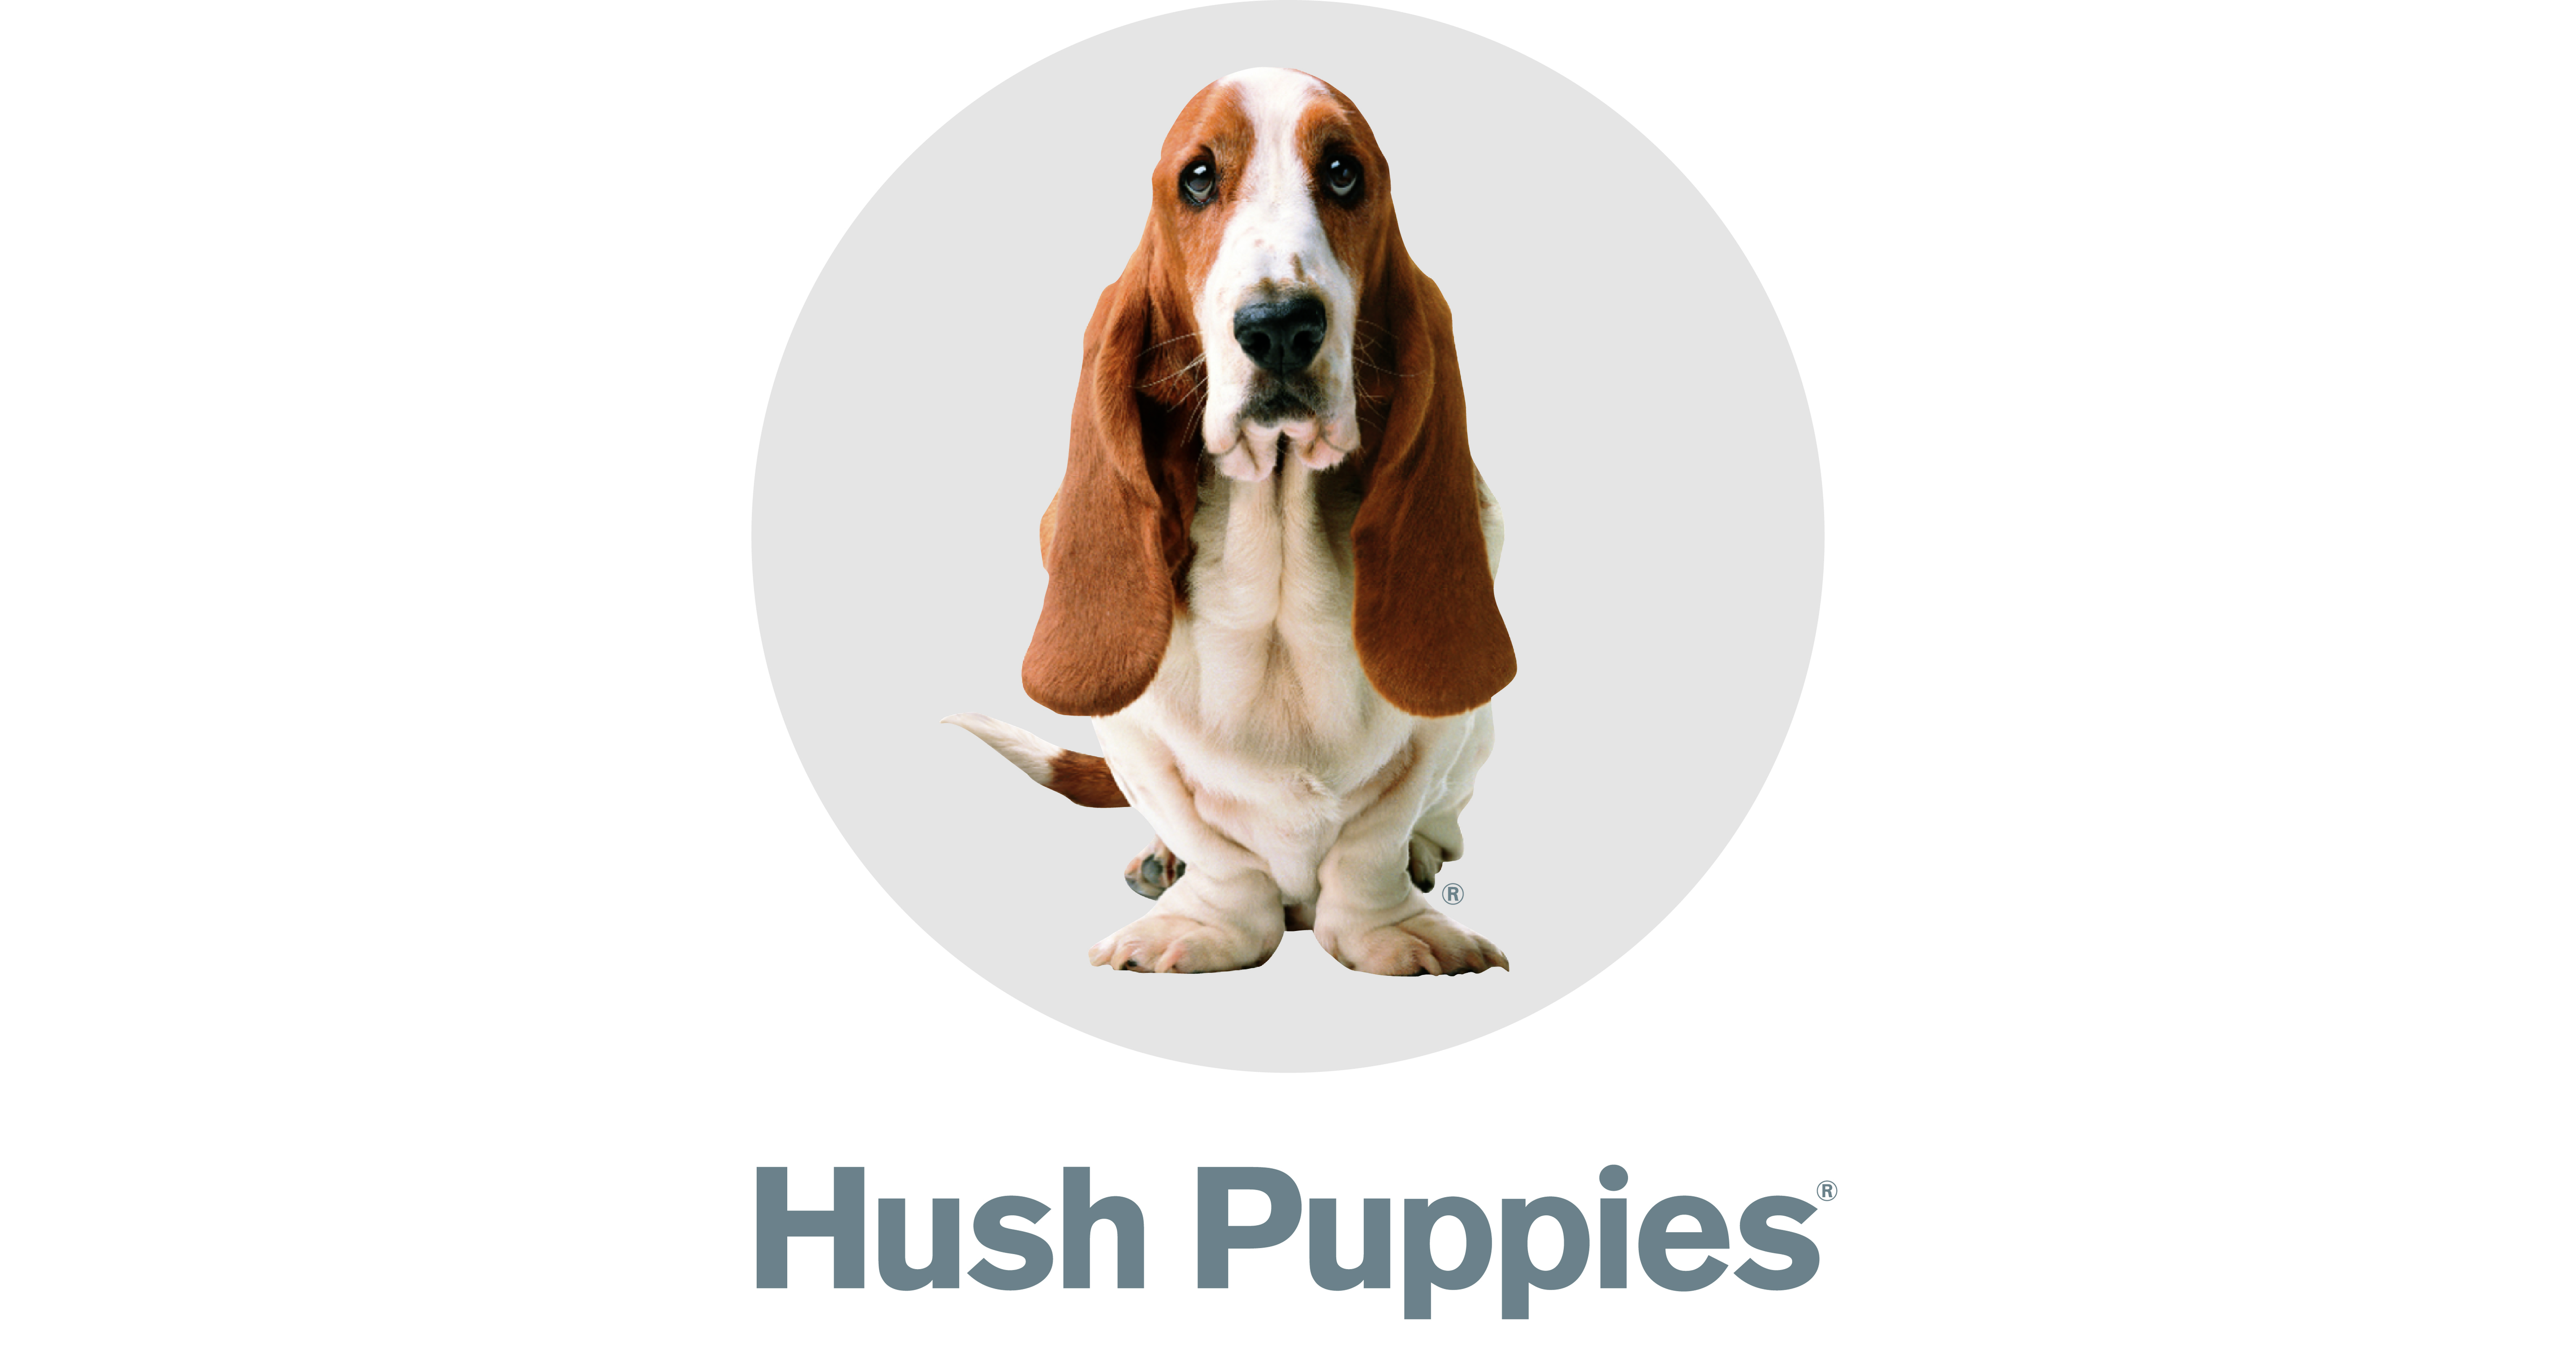 How Do You Say Hush Puppies In Spanish Puppy And Pets